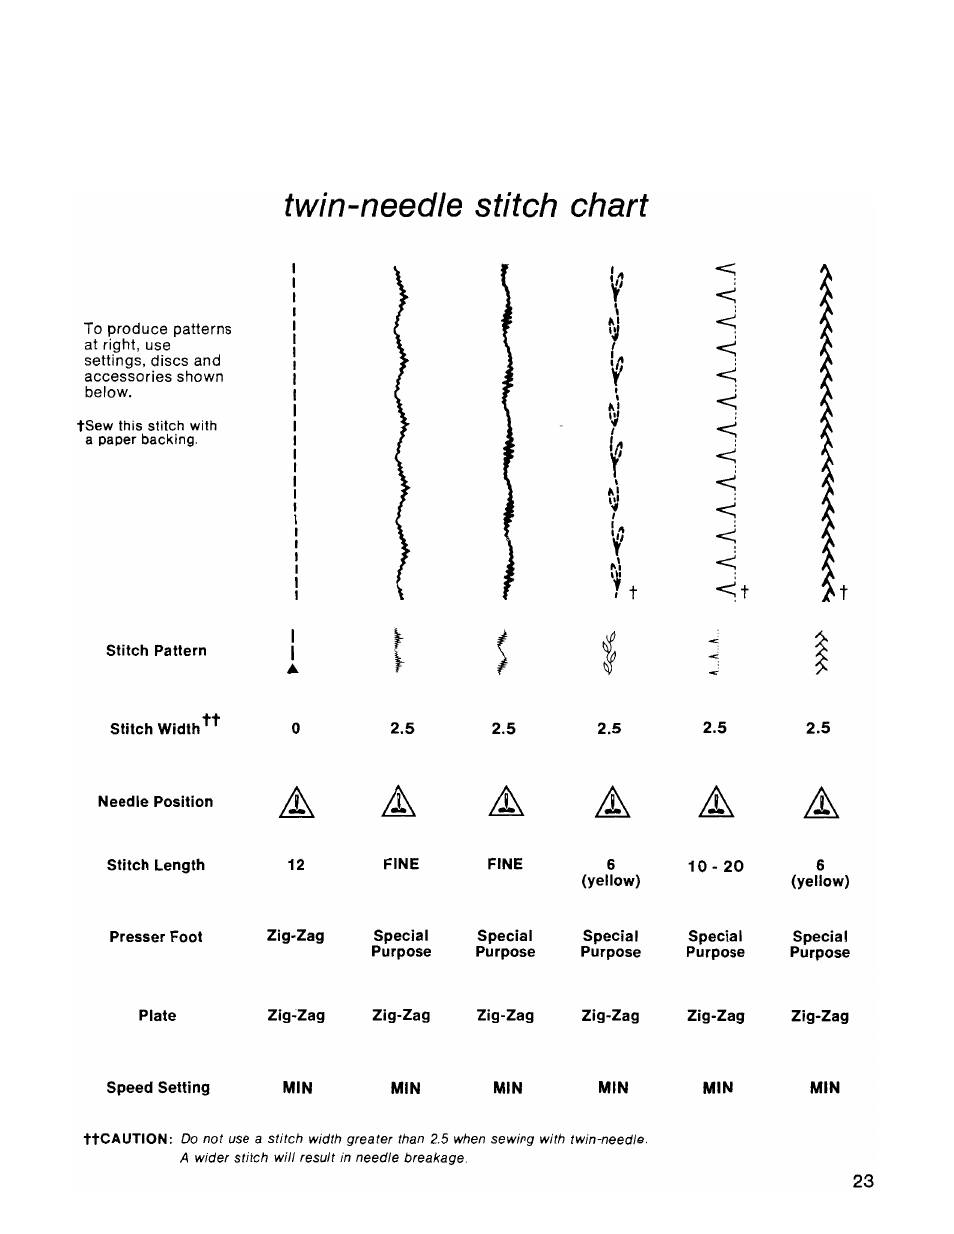 Twin-needle stitch chart | SINGER 1036 Creative Touch User Manual | Page 28 / 66